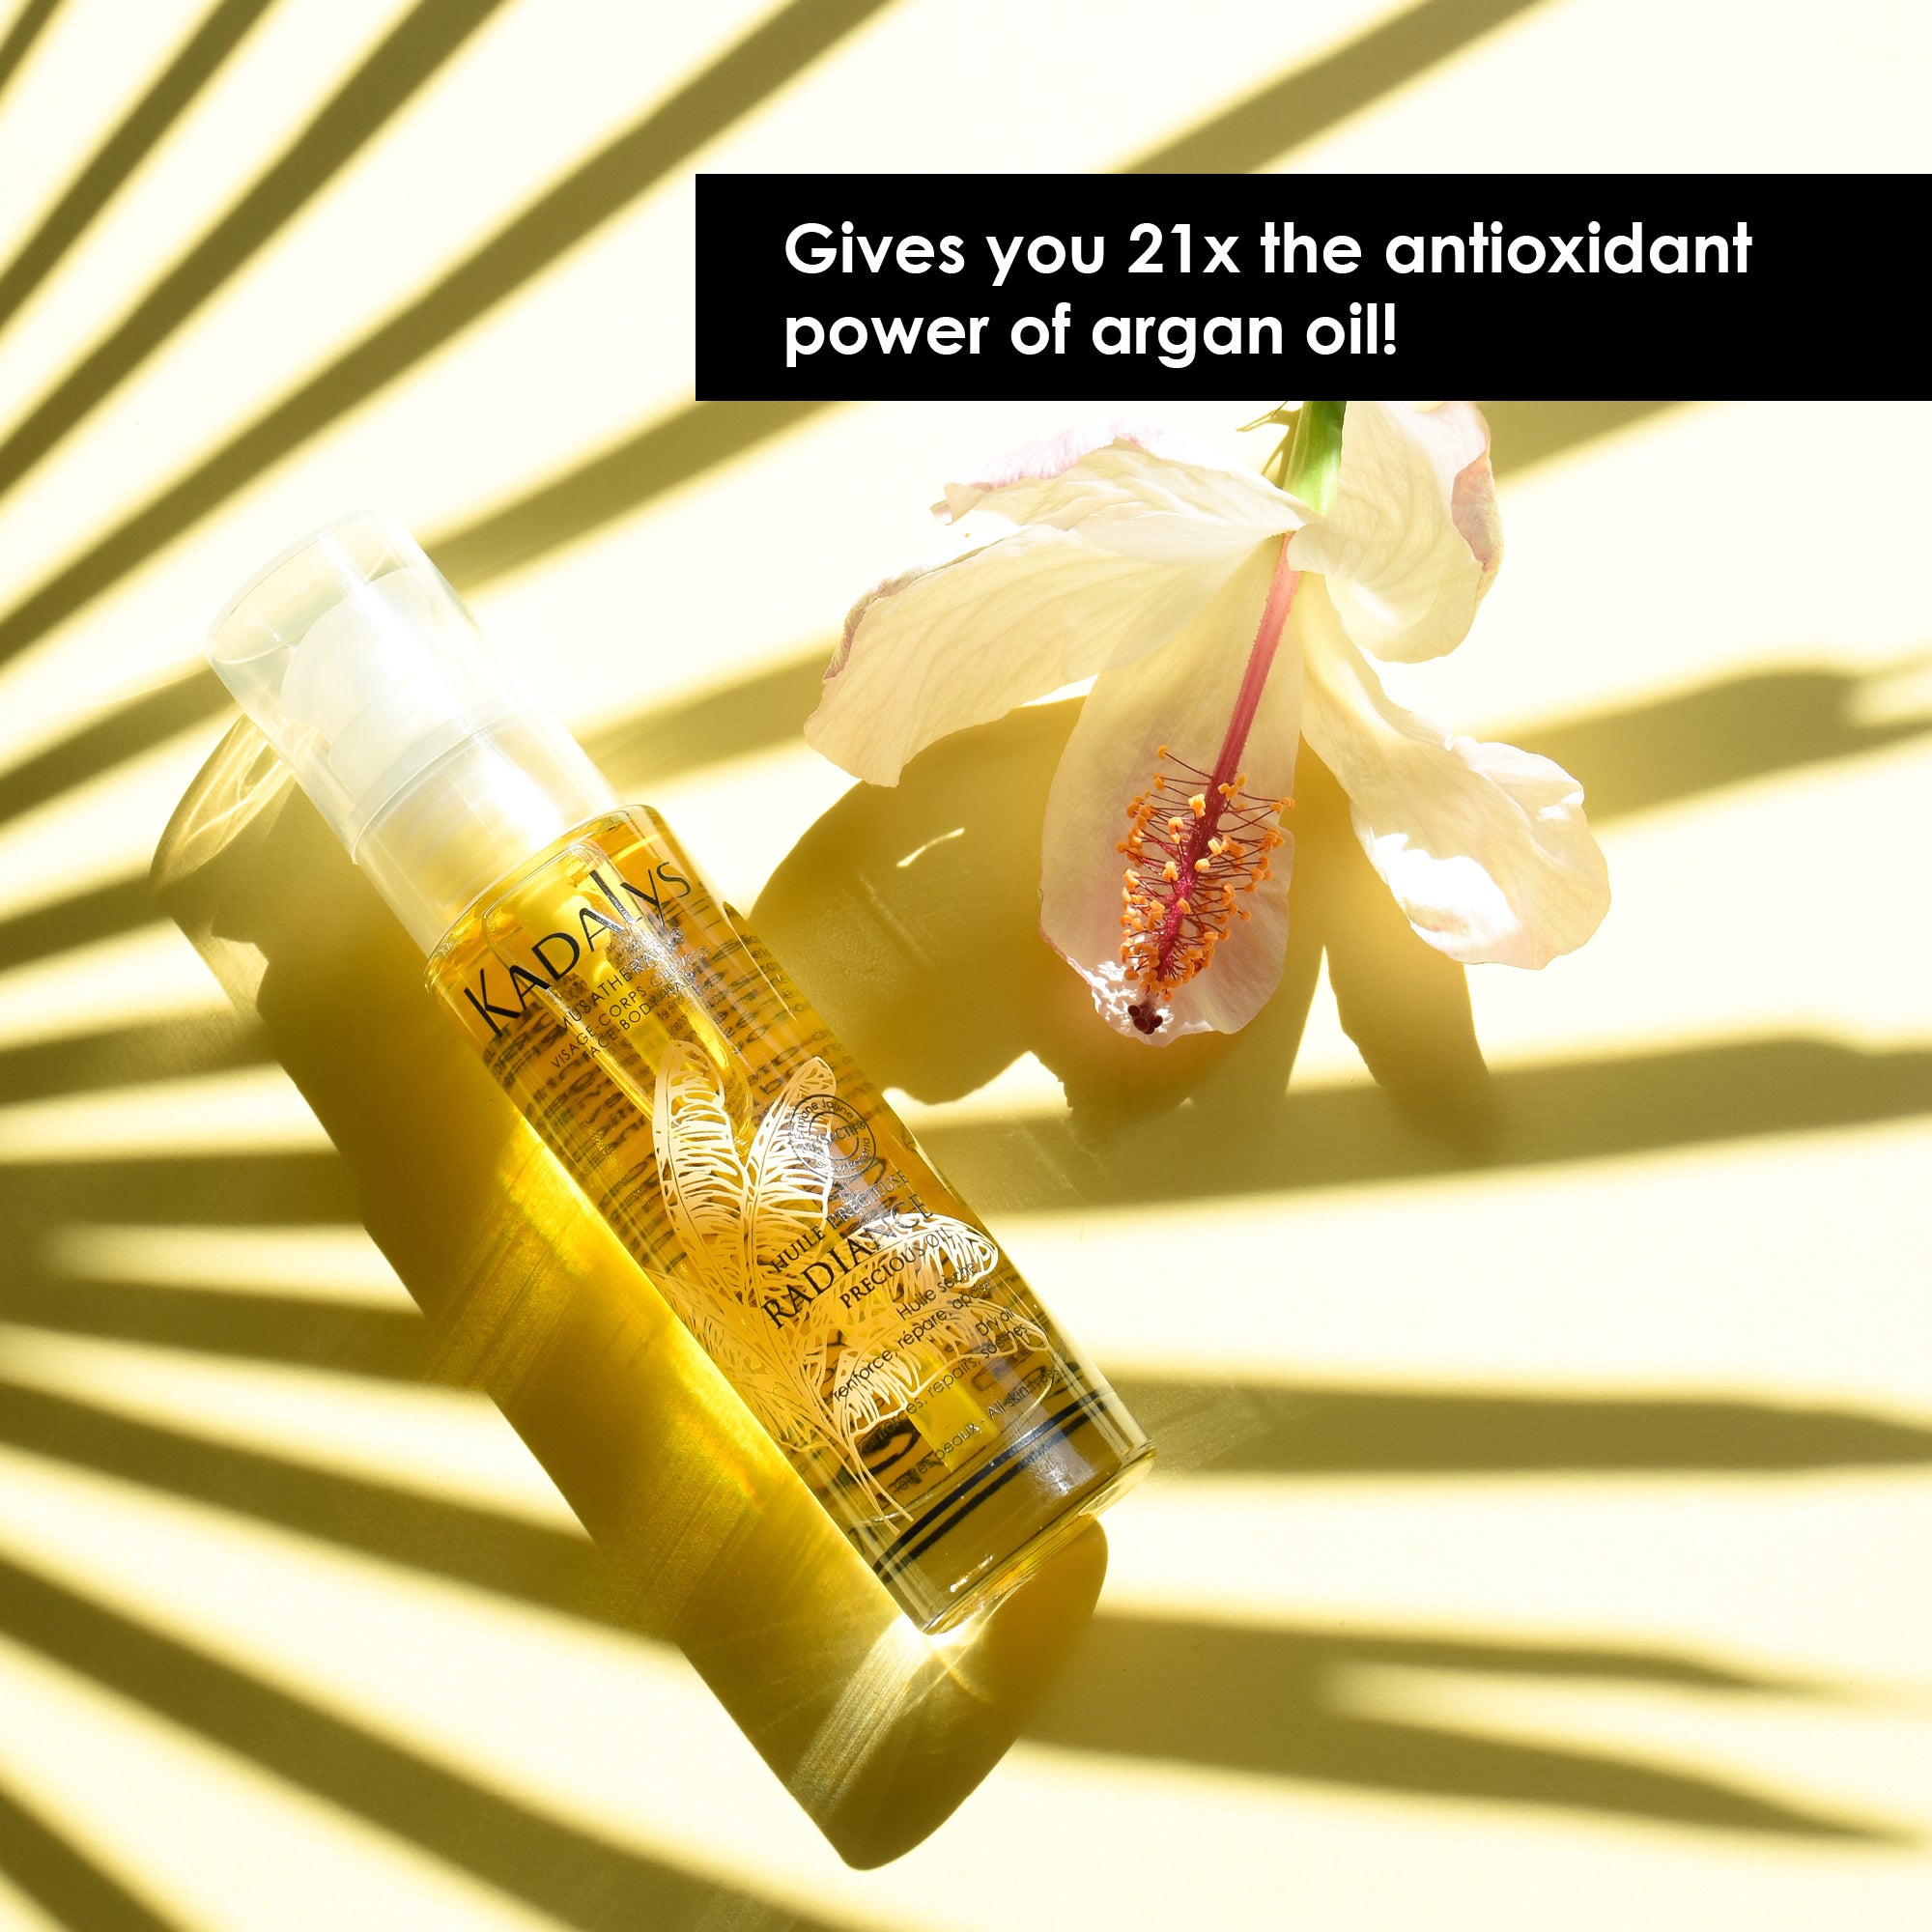 Image of Radiance oil against shadows of plant leaves.  Text reads: 21x the antioxidant power of argan oil.